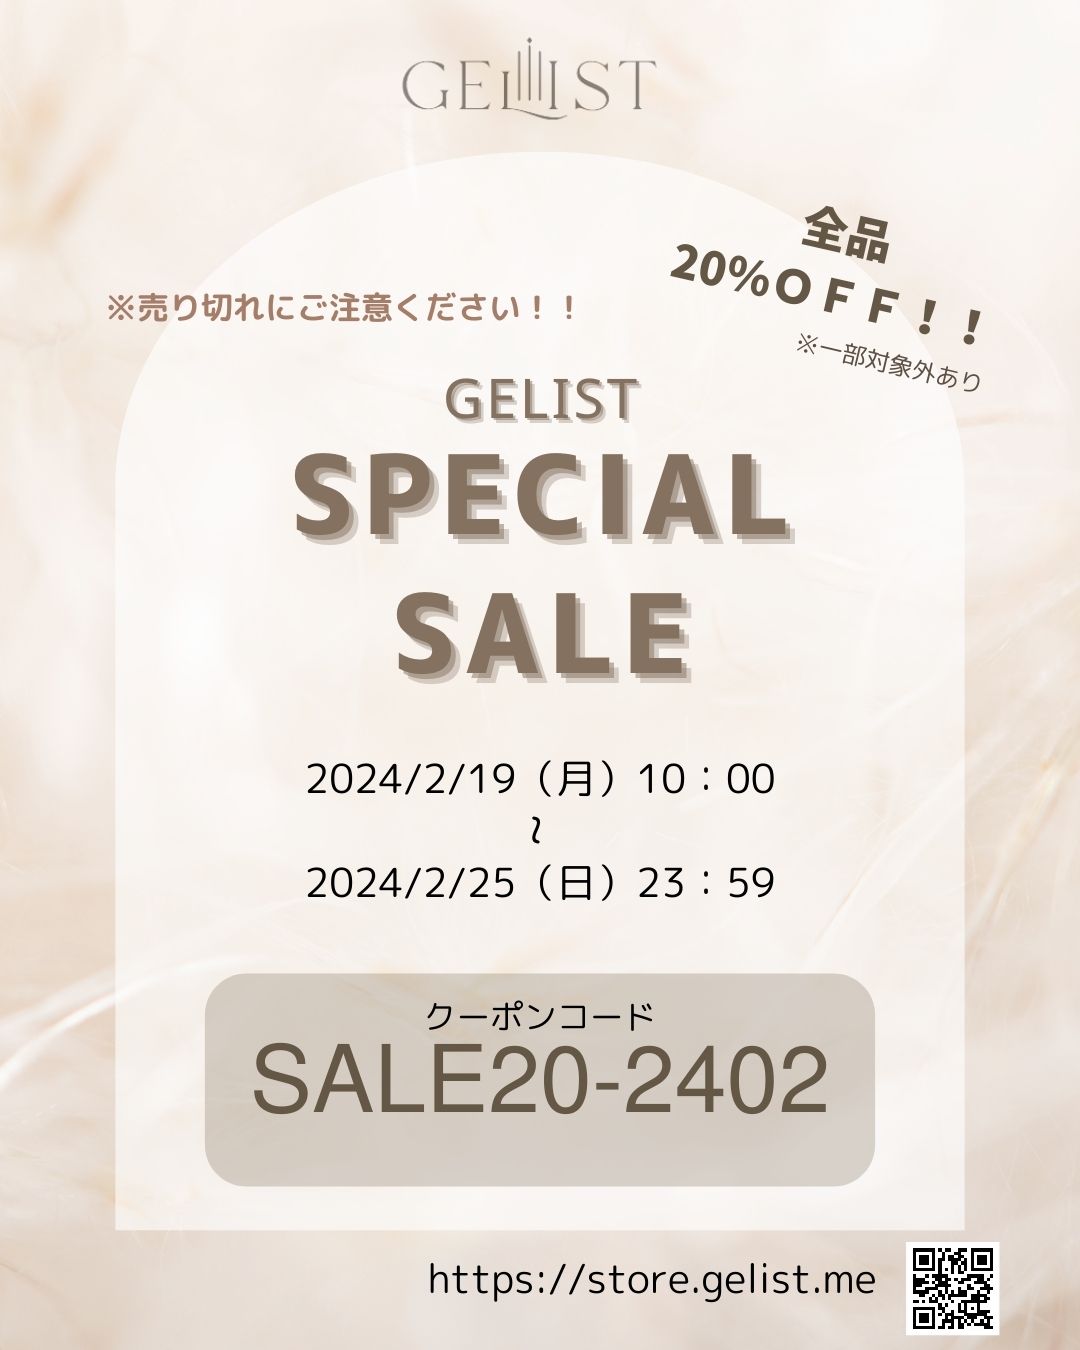 「GELIST SPECIAL SALE」に関するお知らせ